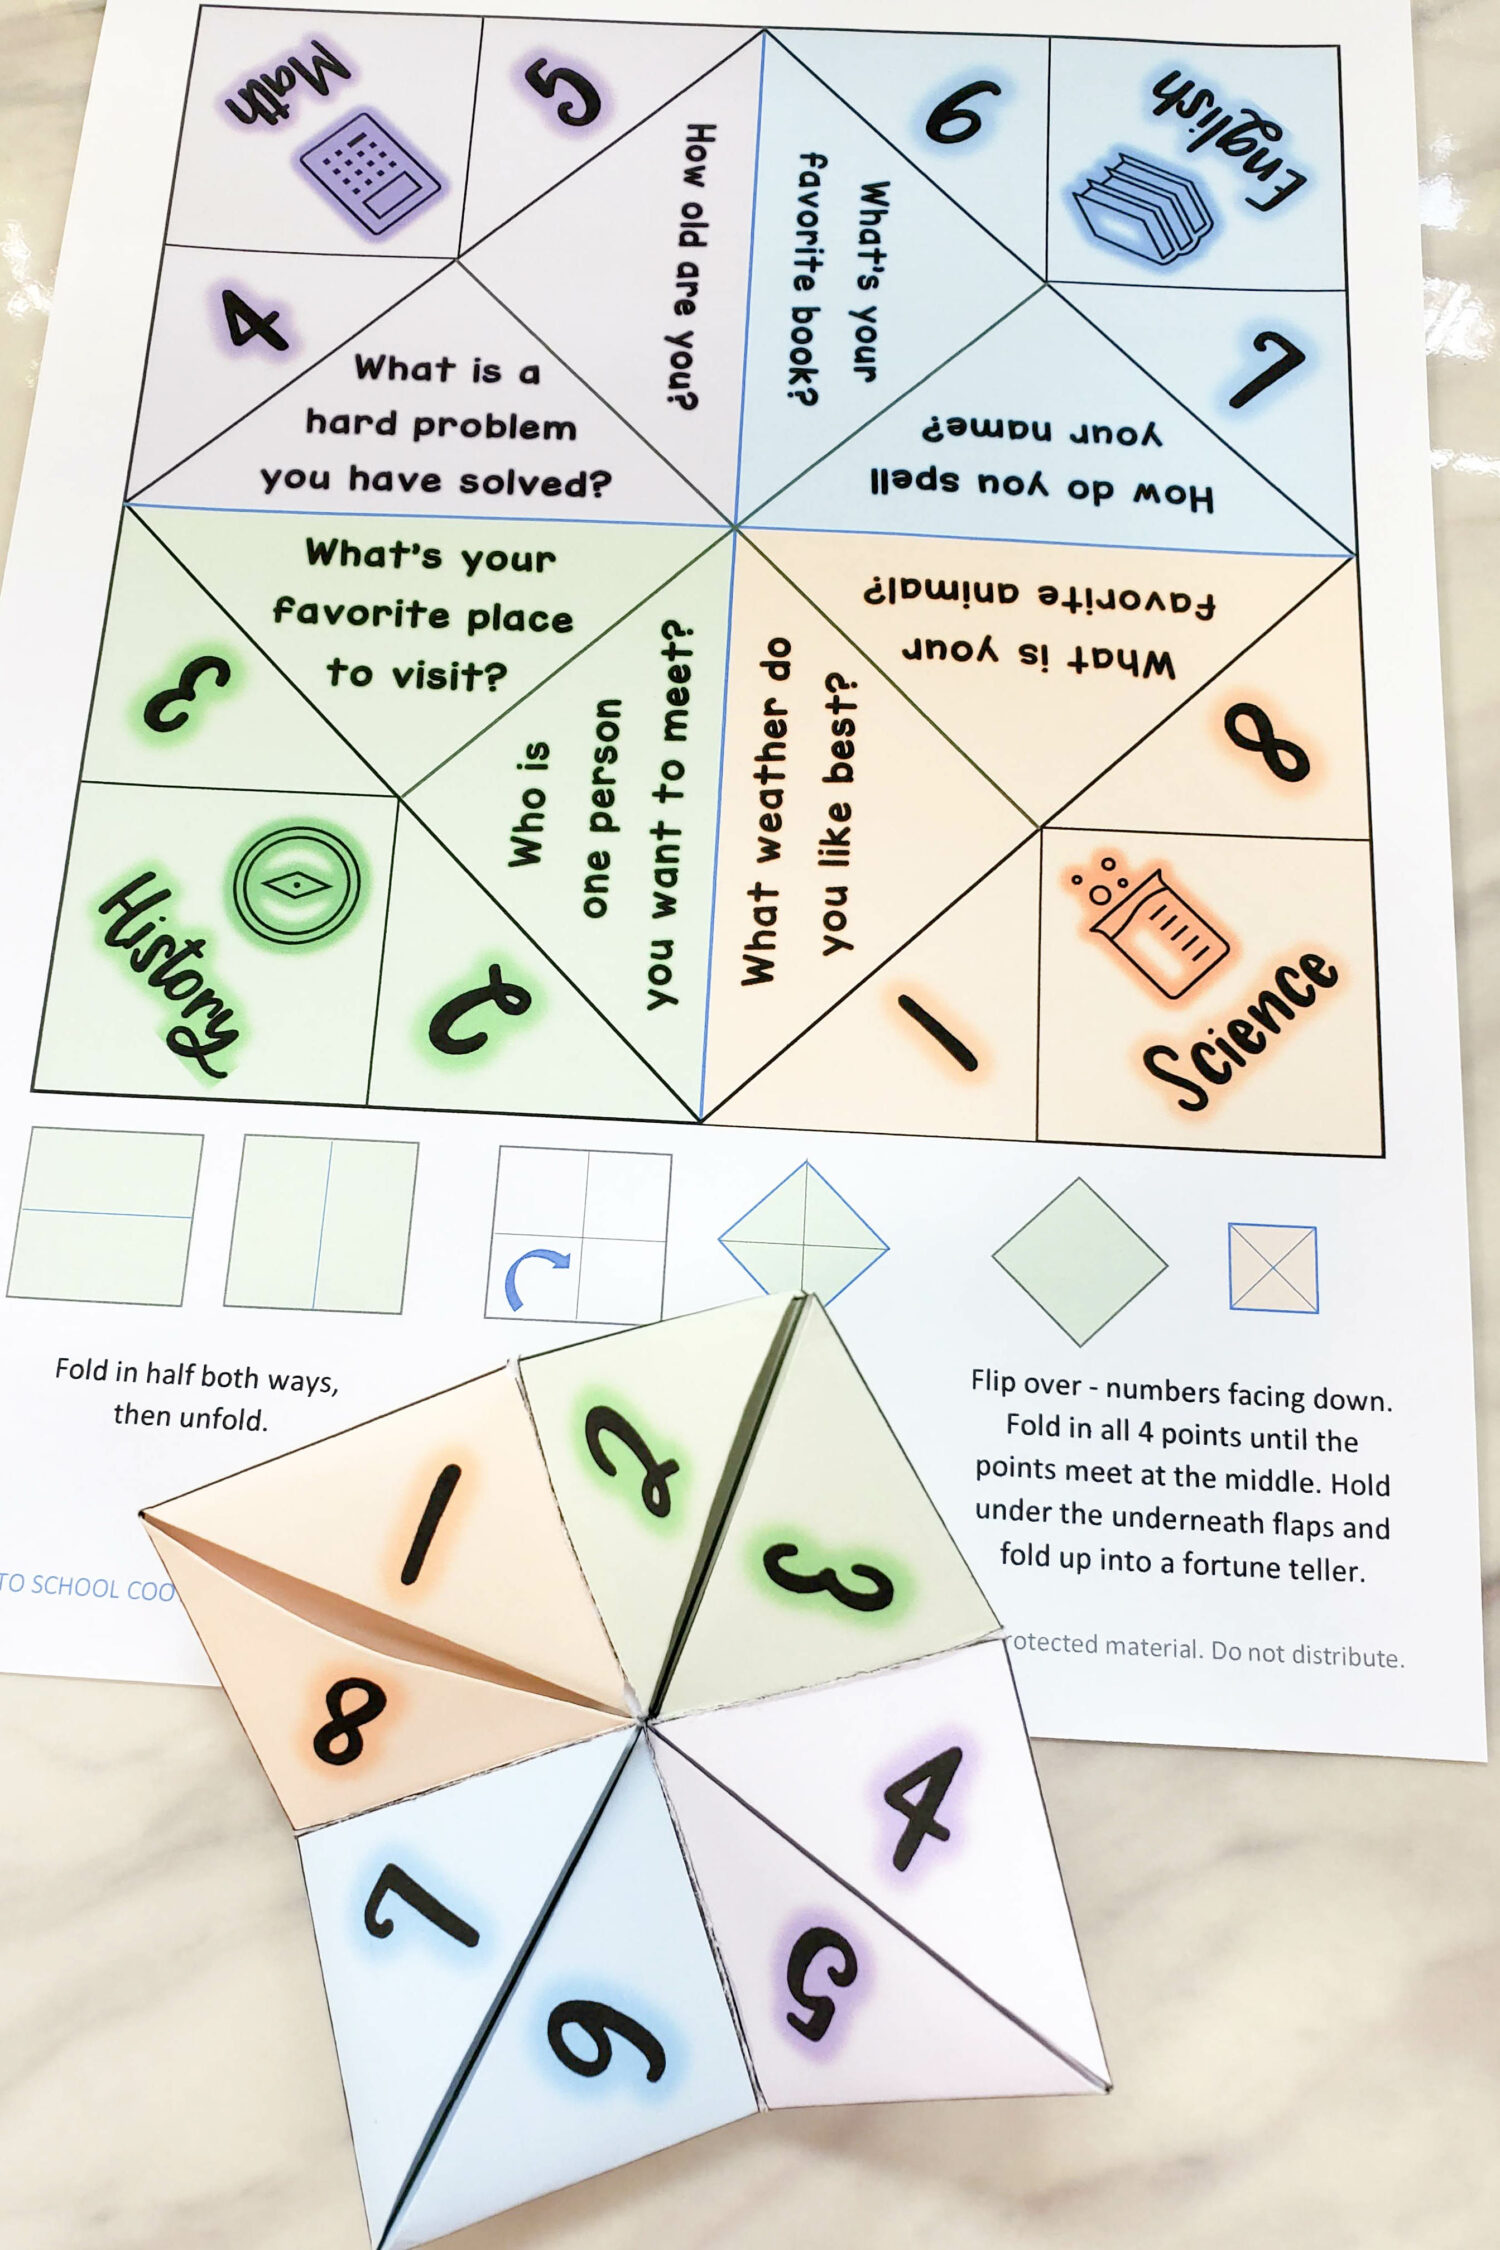 Back to School Cootie Catcher1 Getting to Know You singing time activity! Use this fun fortune teller printable to pick a favorite subject and answer a getting to know you question! Great activity for Primary music leaders.